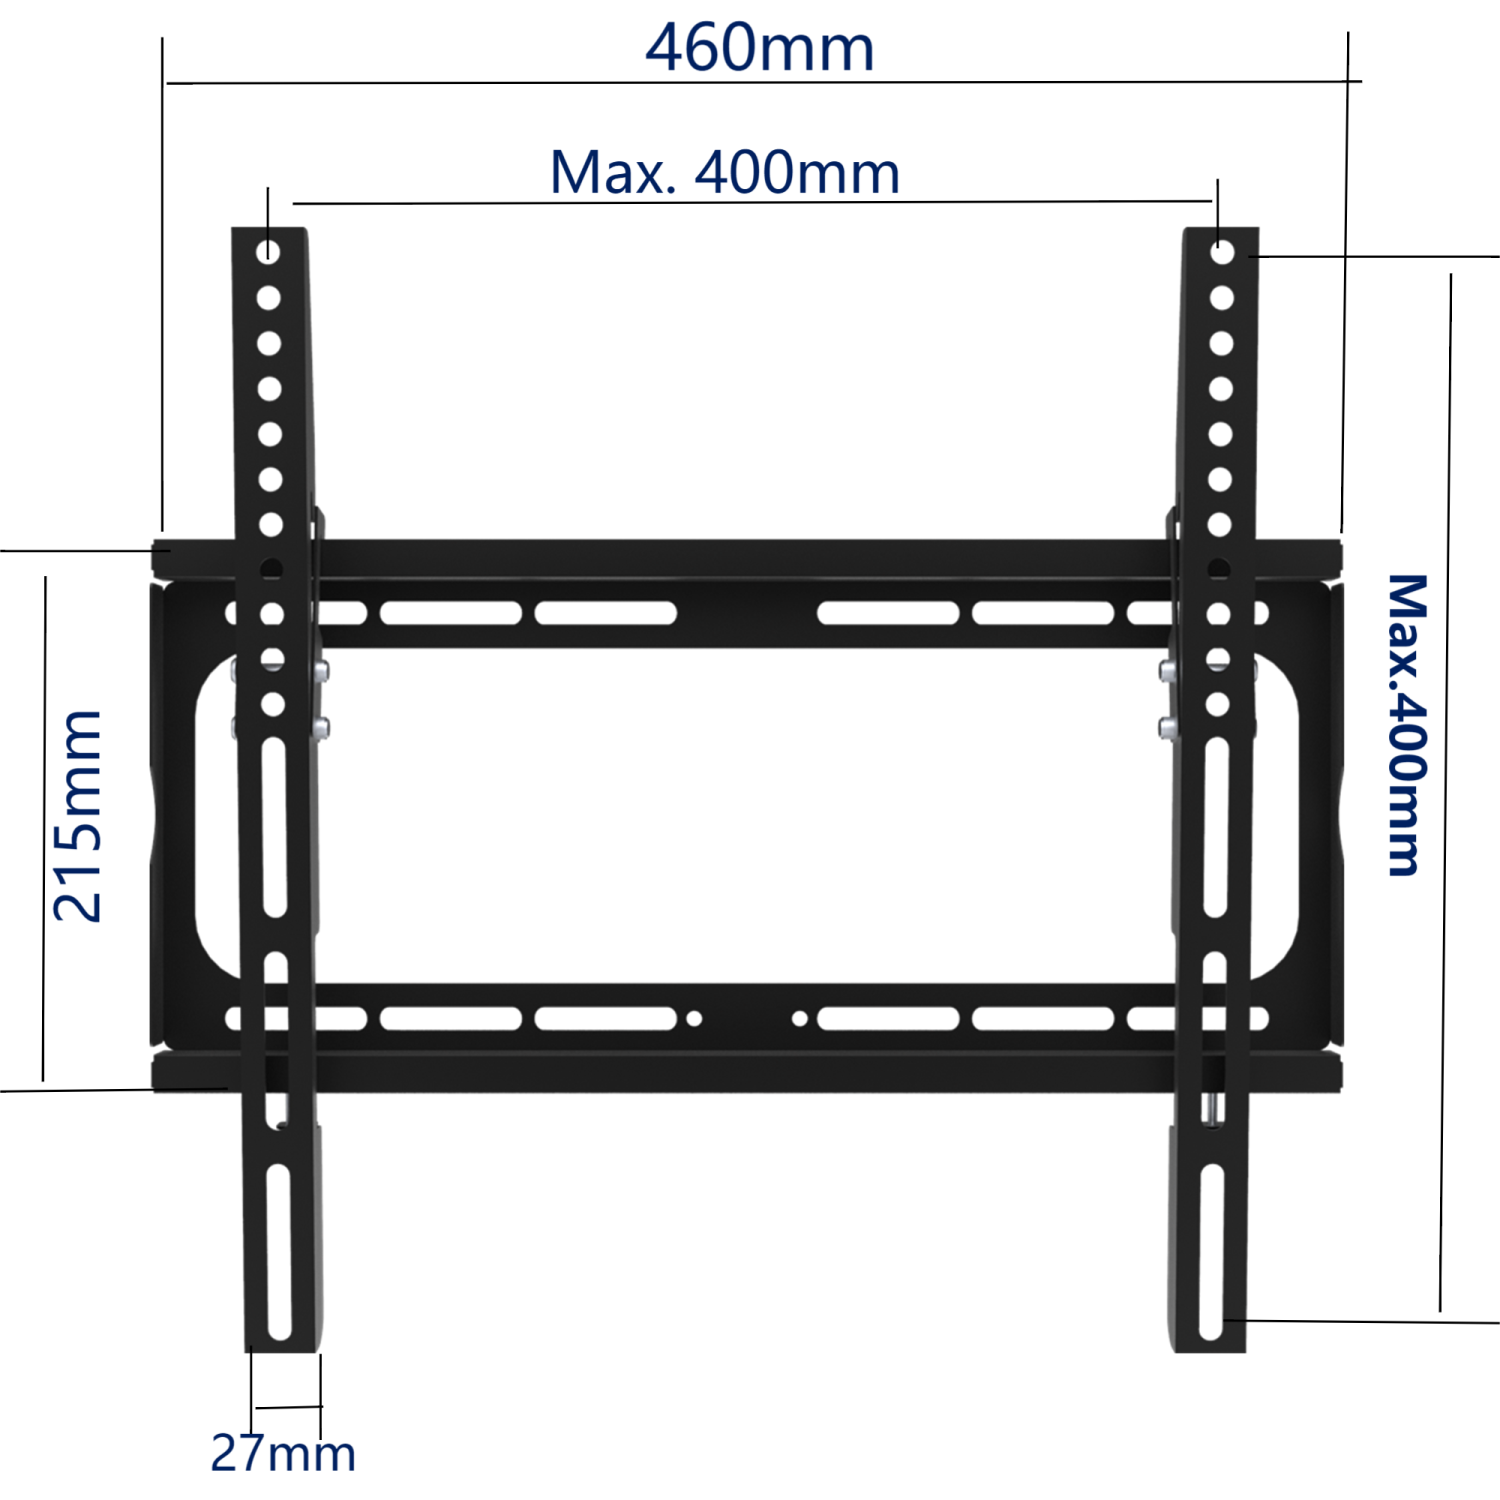 TV Wall Mount (26- 55) Inch, Any Brand TV Supported